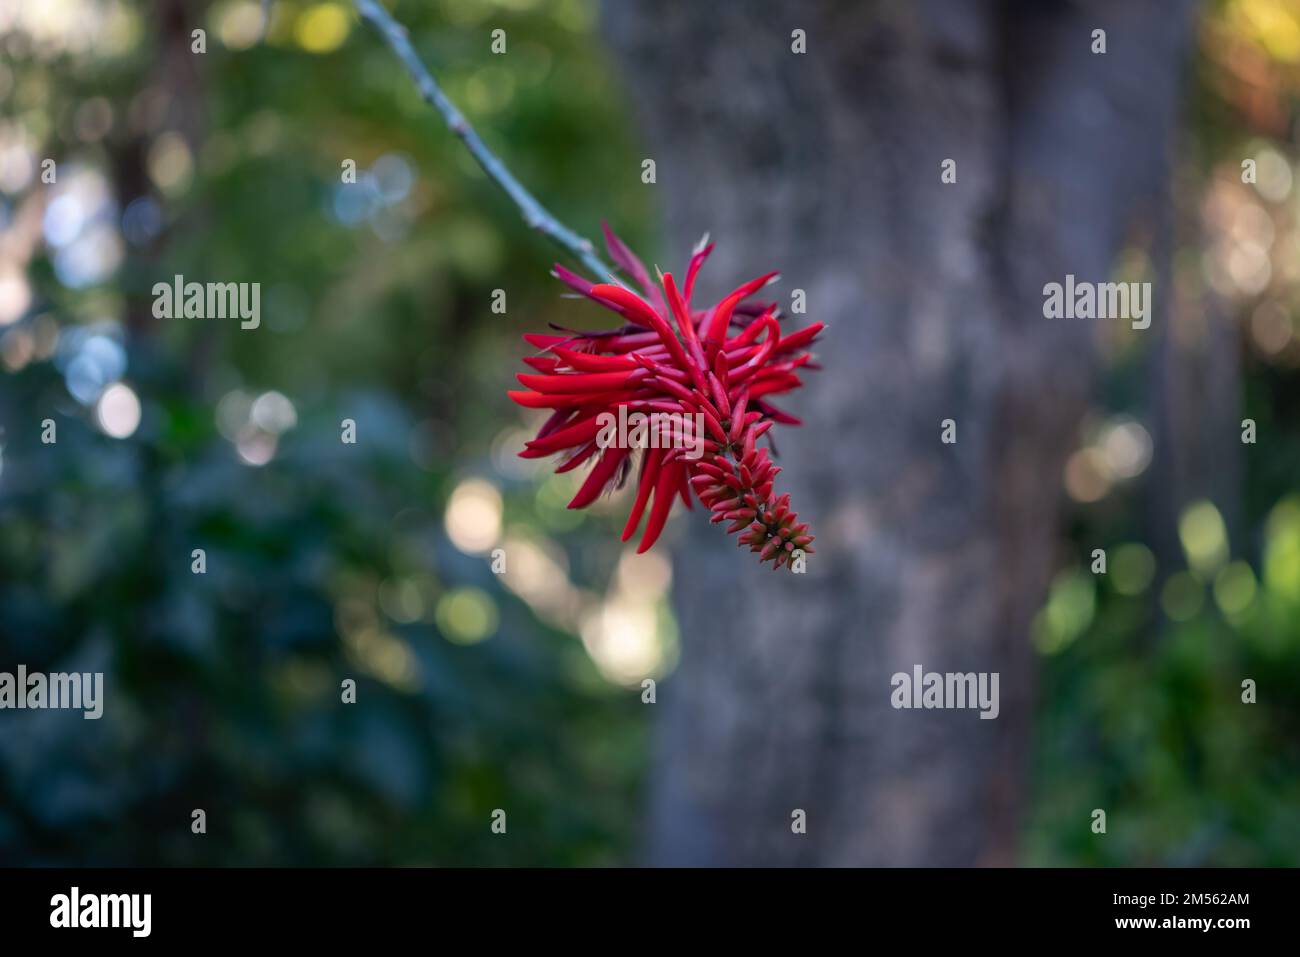 Red flower of Erythrina rubrinervia or Red-Veined Coral Tree on blurred leaves Stock Photo